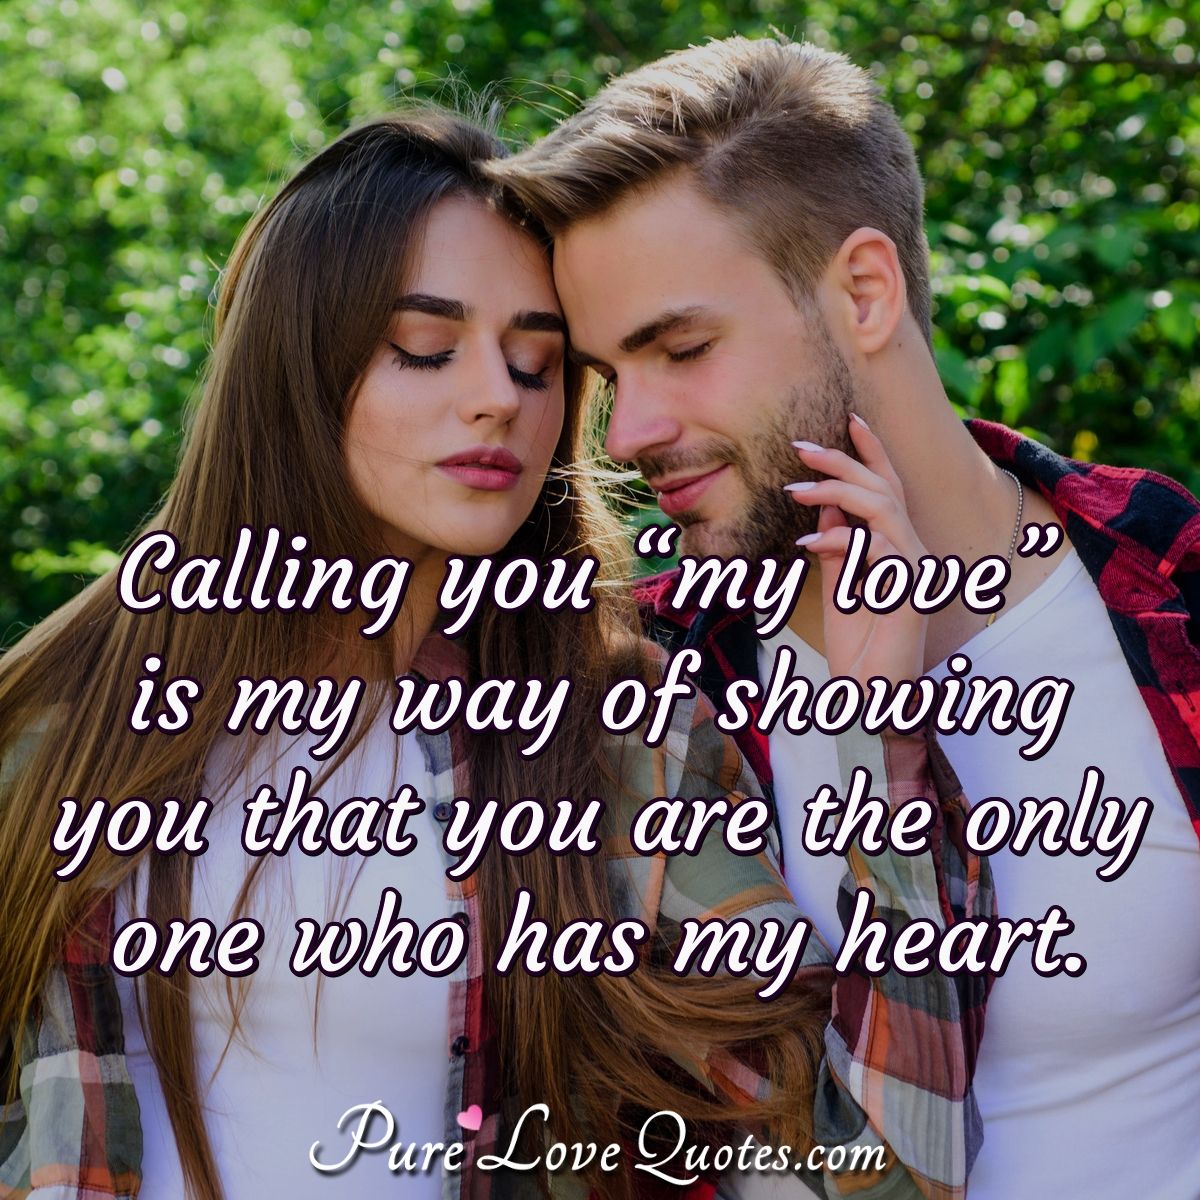 Calling you “my love” is my way of showing you that you are the only one who has my heart. - Anonymous